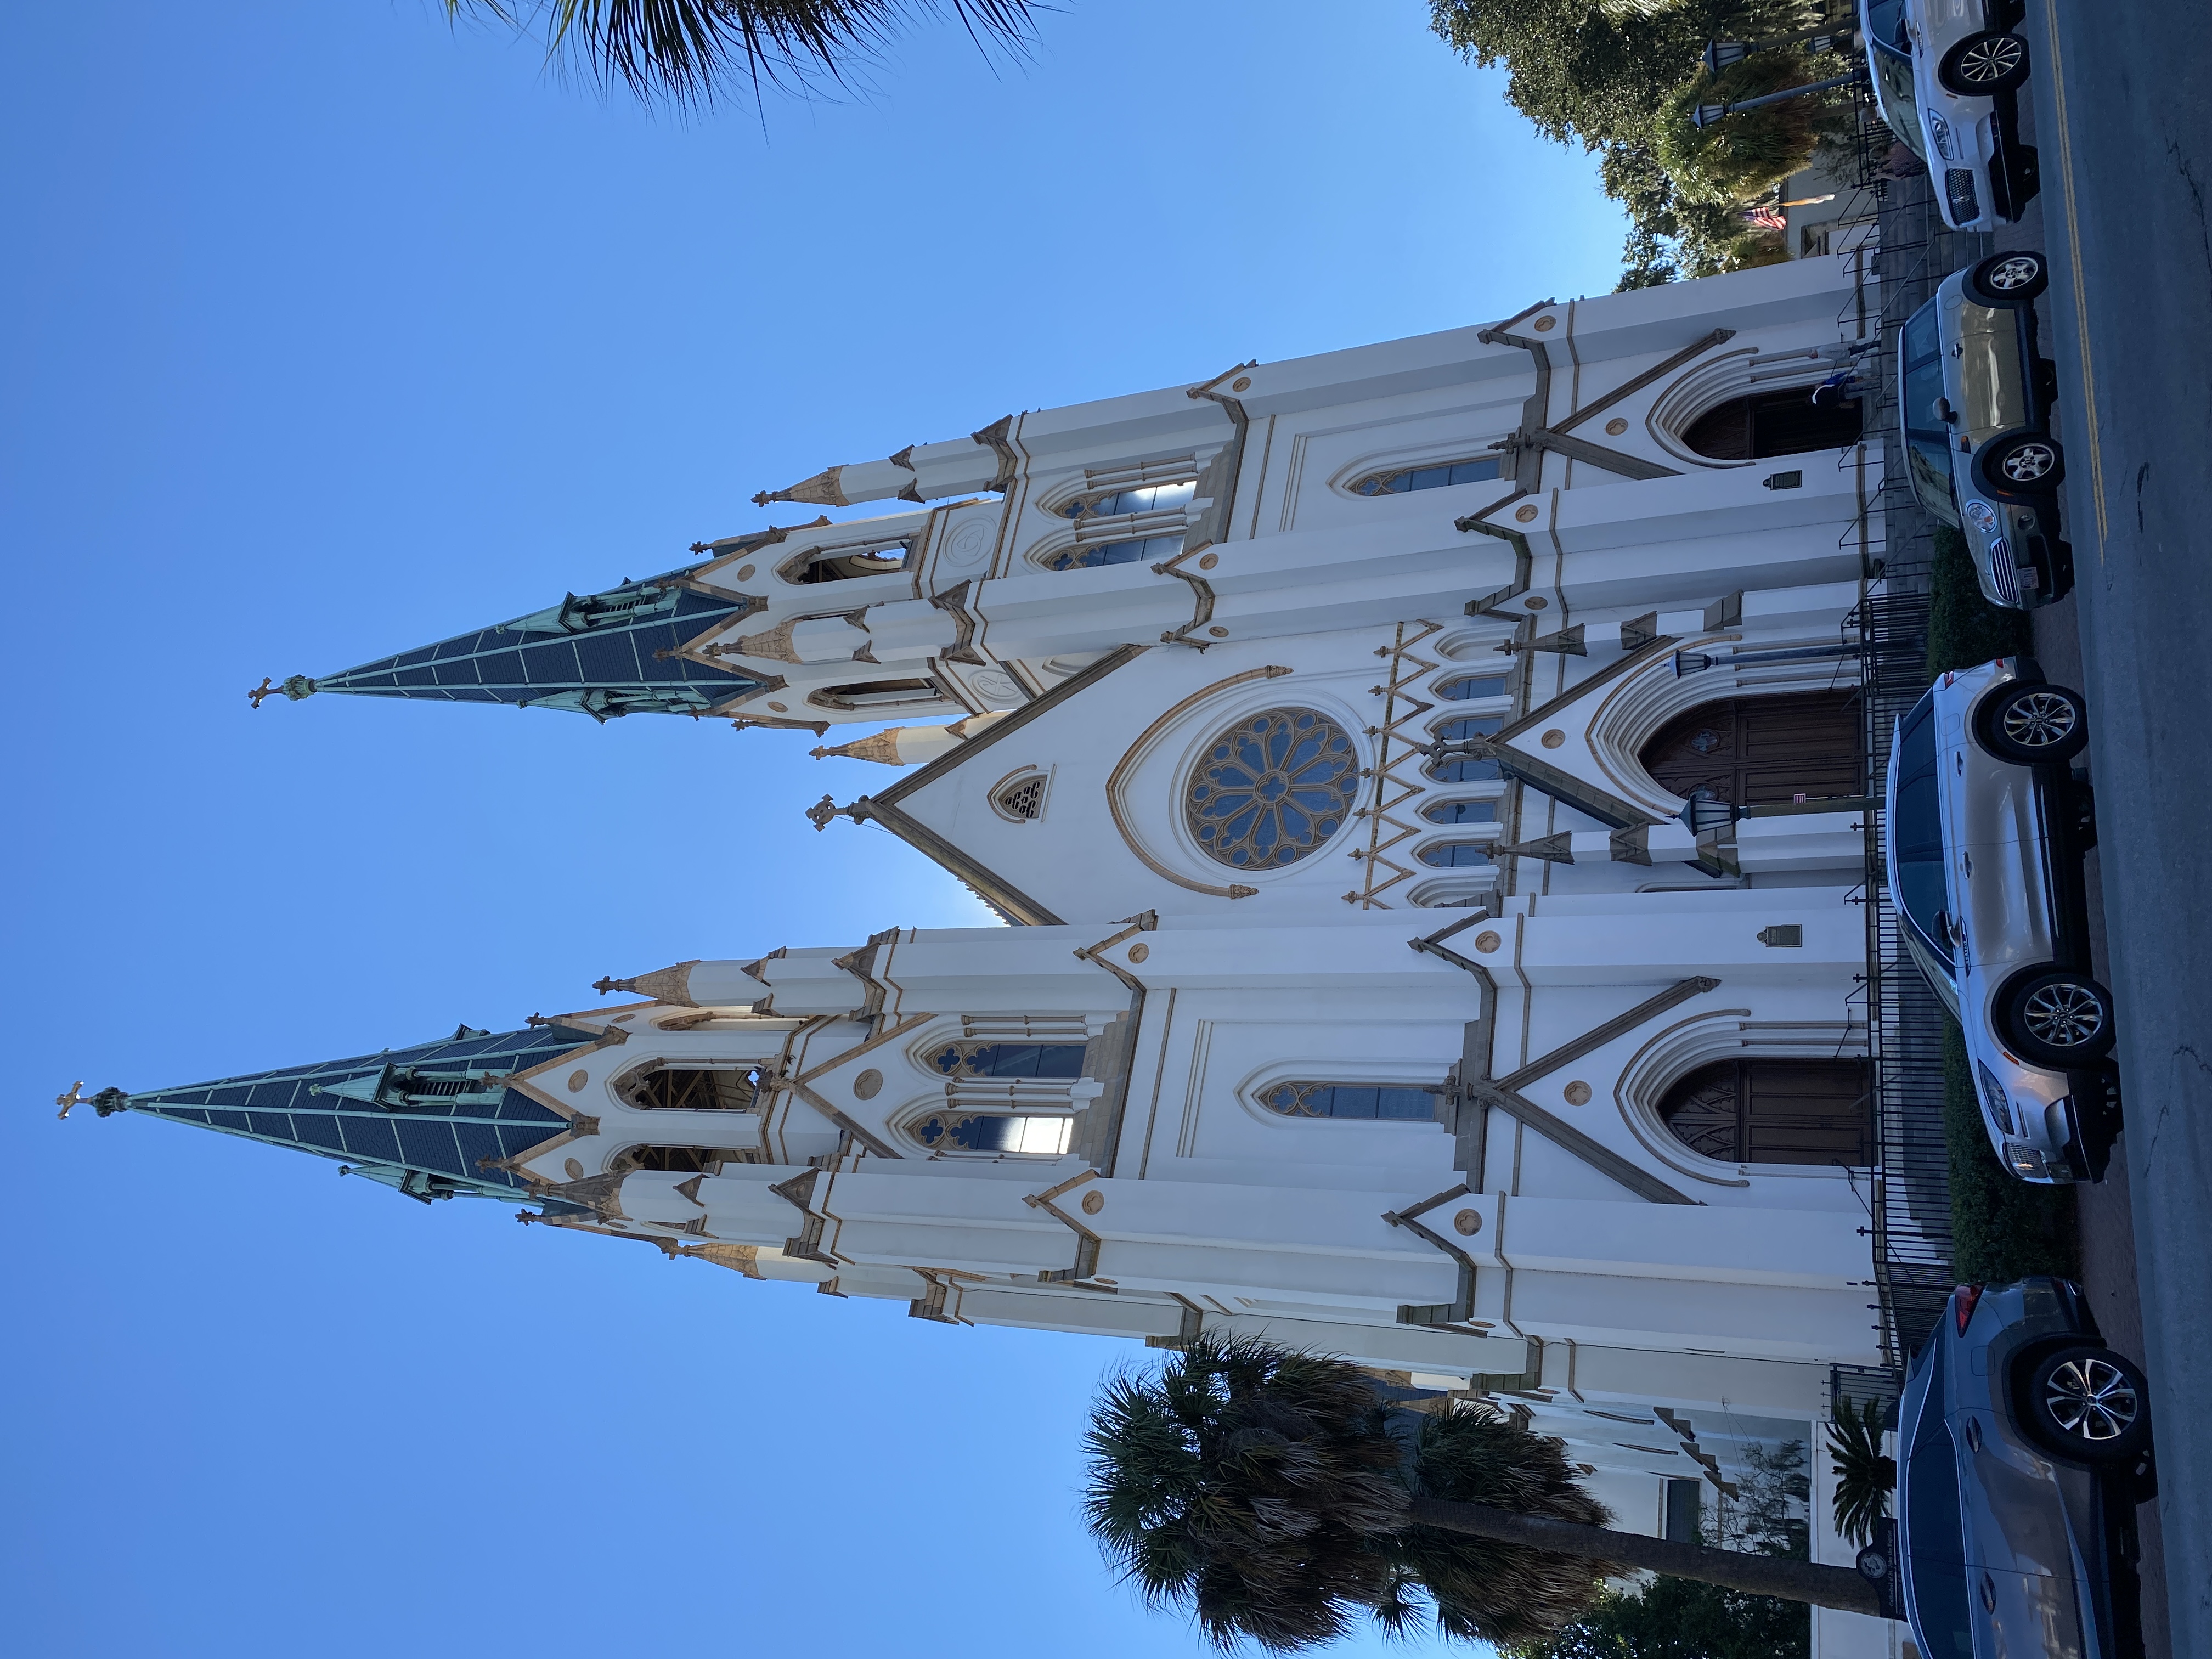 CATHEDRAL BASILICA OF ST. JOHN THE BAPTIST